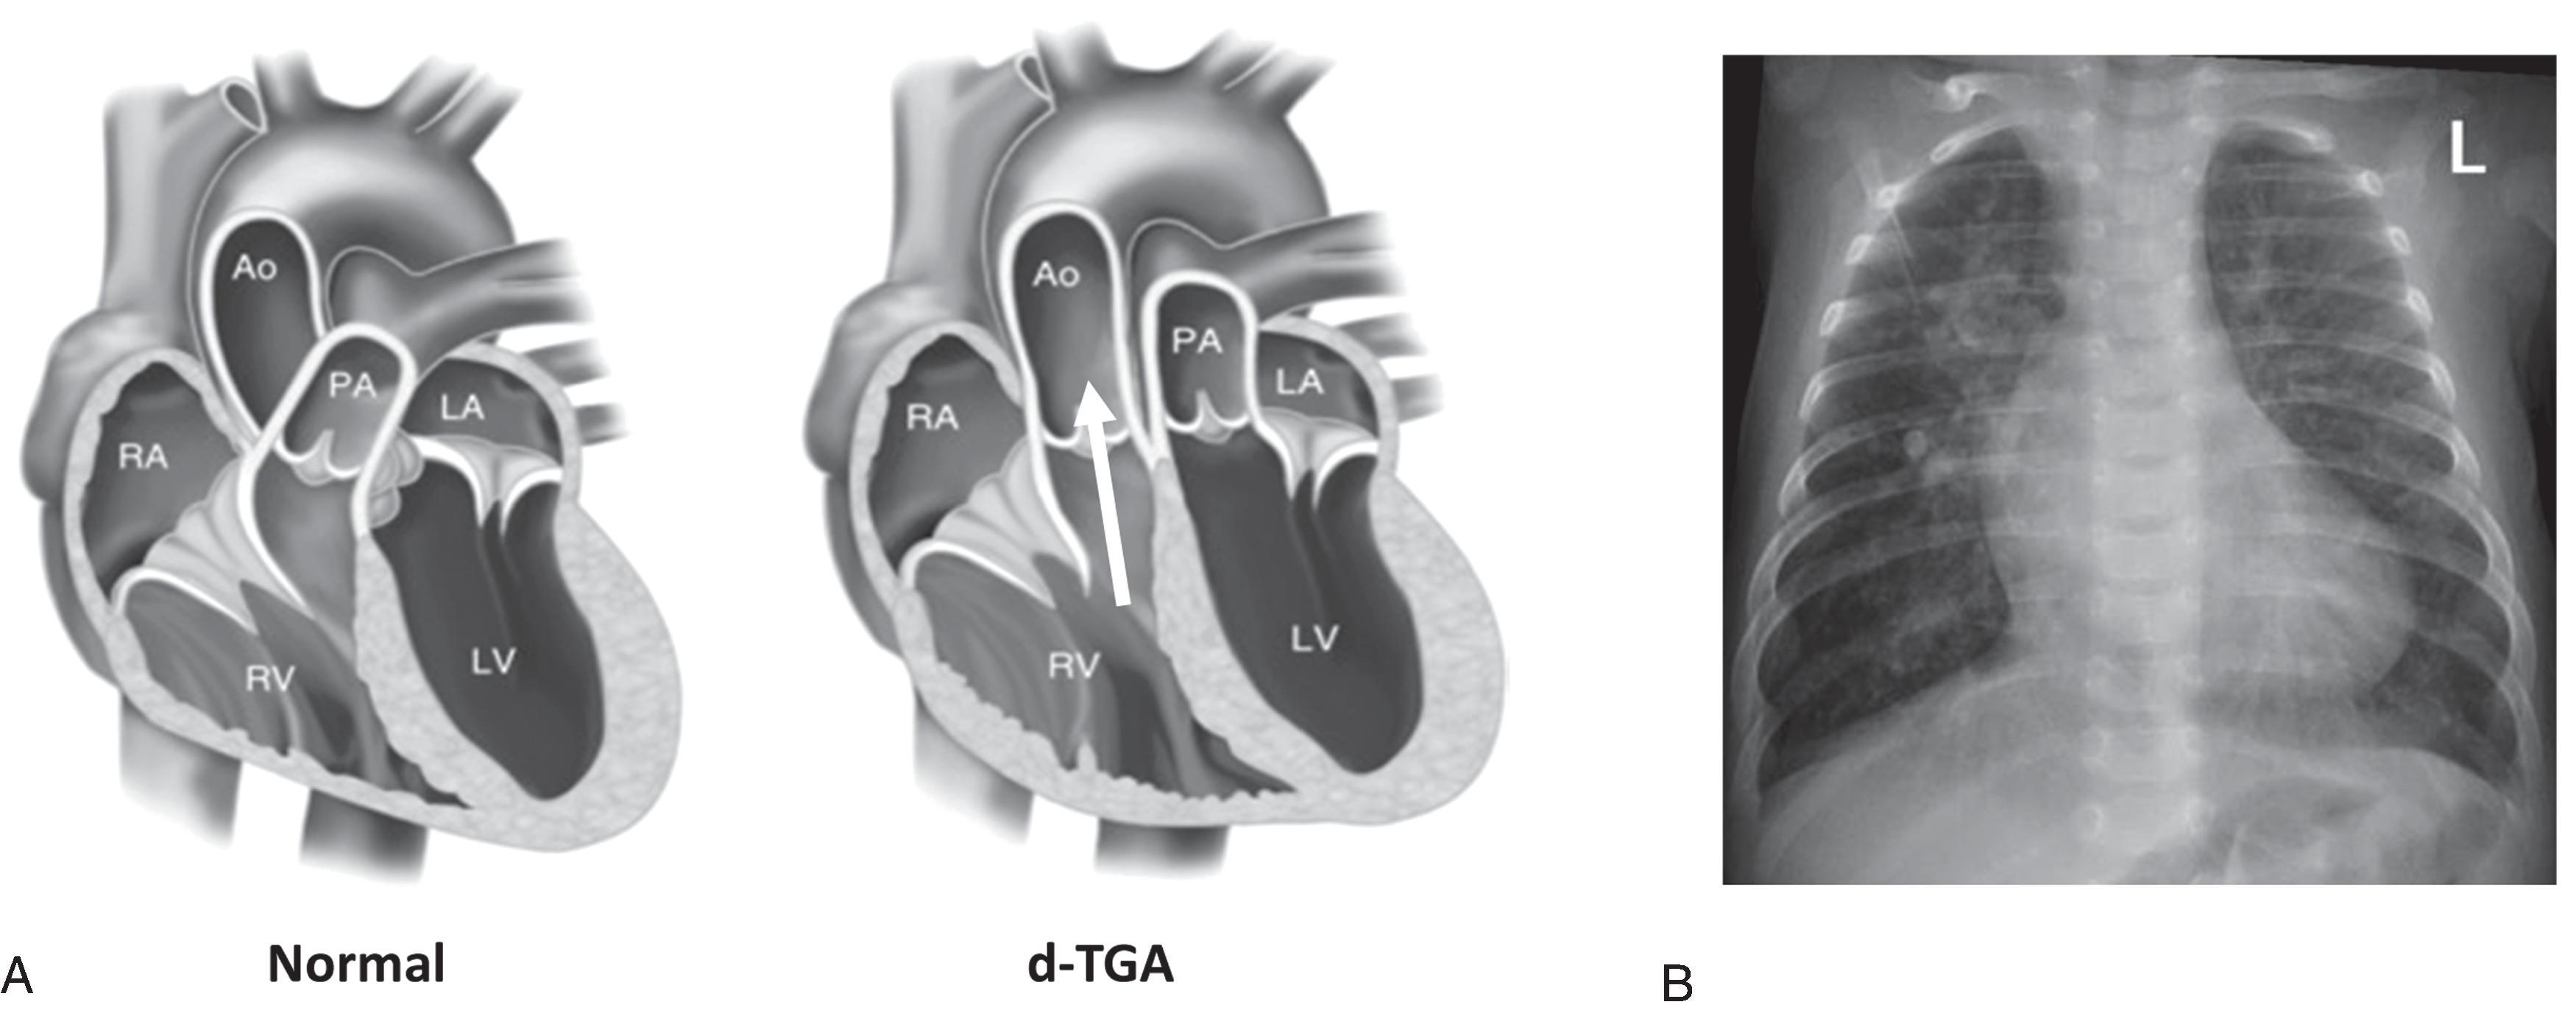 Fig. 36.2, (A) Anatomy of a normal heart and in complete d-transposition of the great arteries (d-TGA). With d-TGA, the aorta arises from the RV (arrow) , and the PA arises from the LV. Before corrective surgery, delivery of oxygenated blood to the systemic circulation depends on intracardiac shunting via an atrial septal defect or a ventricular septal defect. (B) Chest radiograph of an infant with d-TGA showing the egg-on-string appearance. Ao, Aorta; LA, left atrium; LV, left ventricle; PA, pulmonary artery; RA, right atrium; RV, right ventricle. (This figure was modified and reproduced with permission from Otto. Textbook of Clinical Echocardiography , 17, 473–506.)